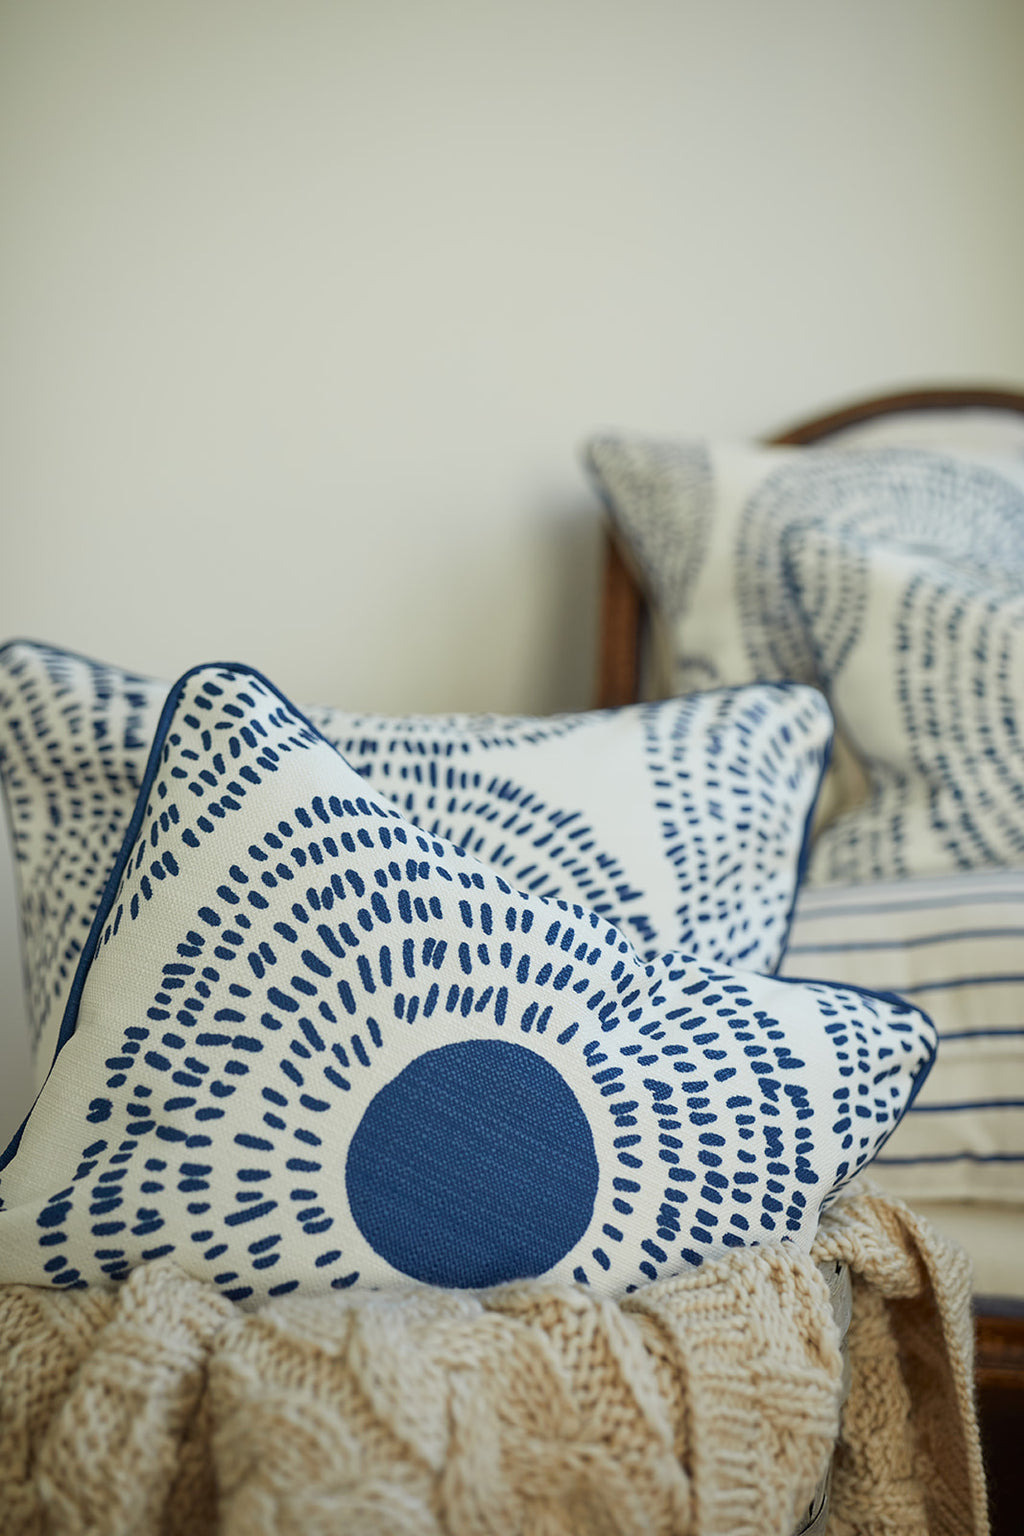 Designer Inspired  Throw Pillows - Southern State of Mind